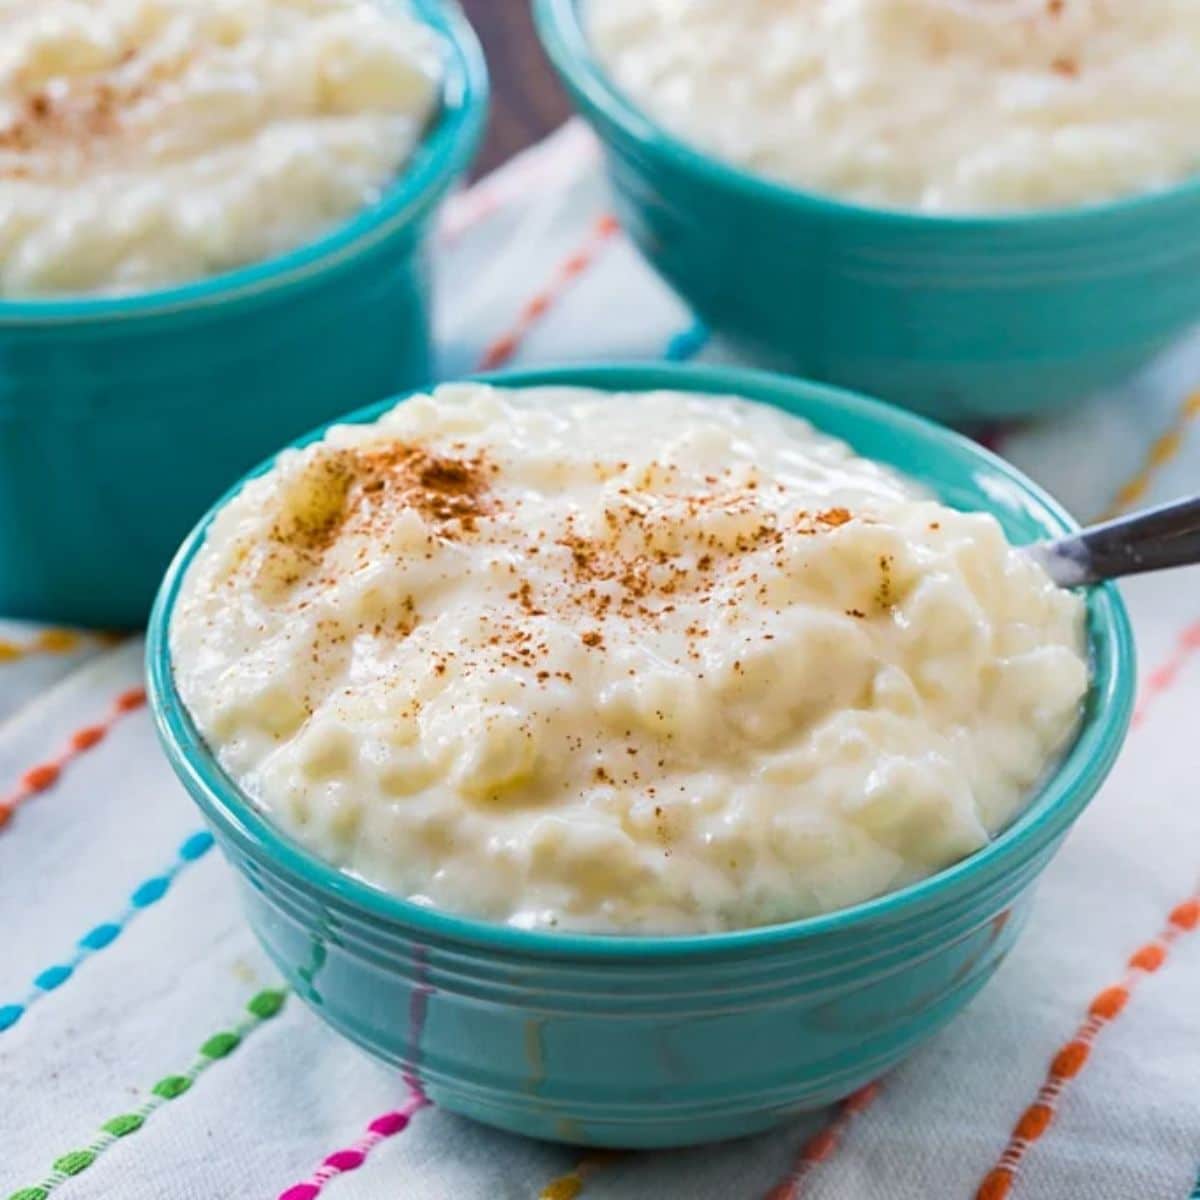 Delicious rice pudding in a blue bowl.